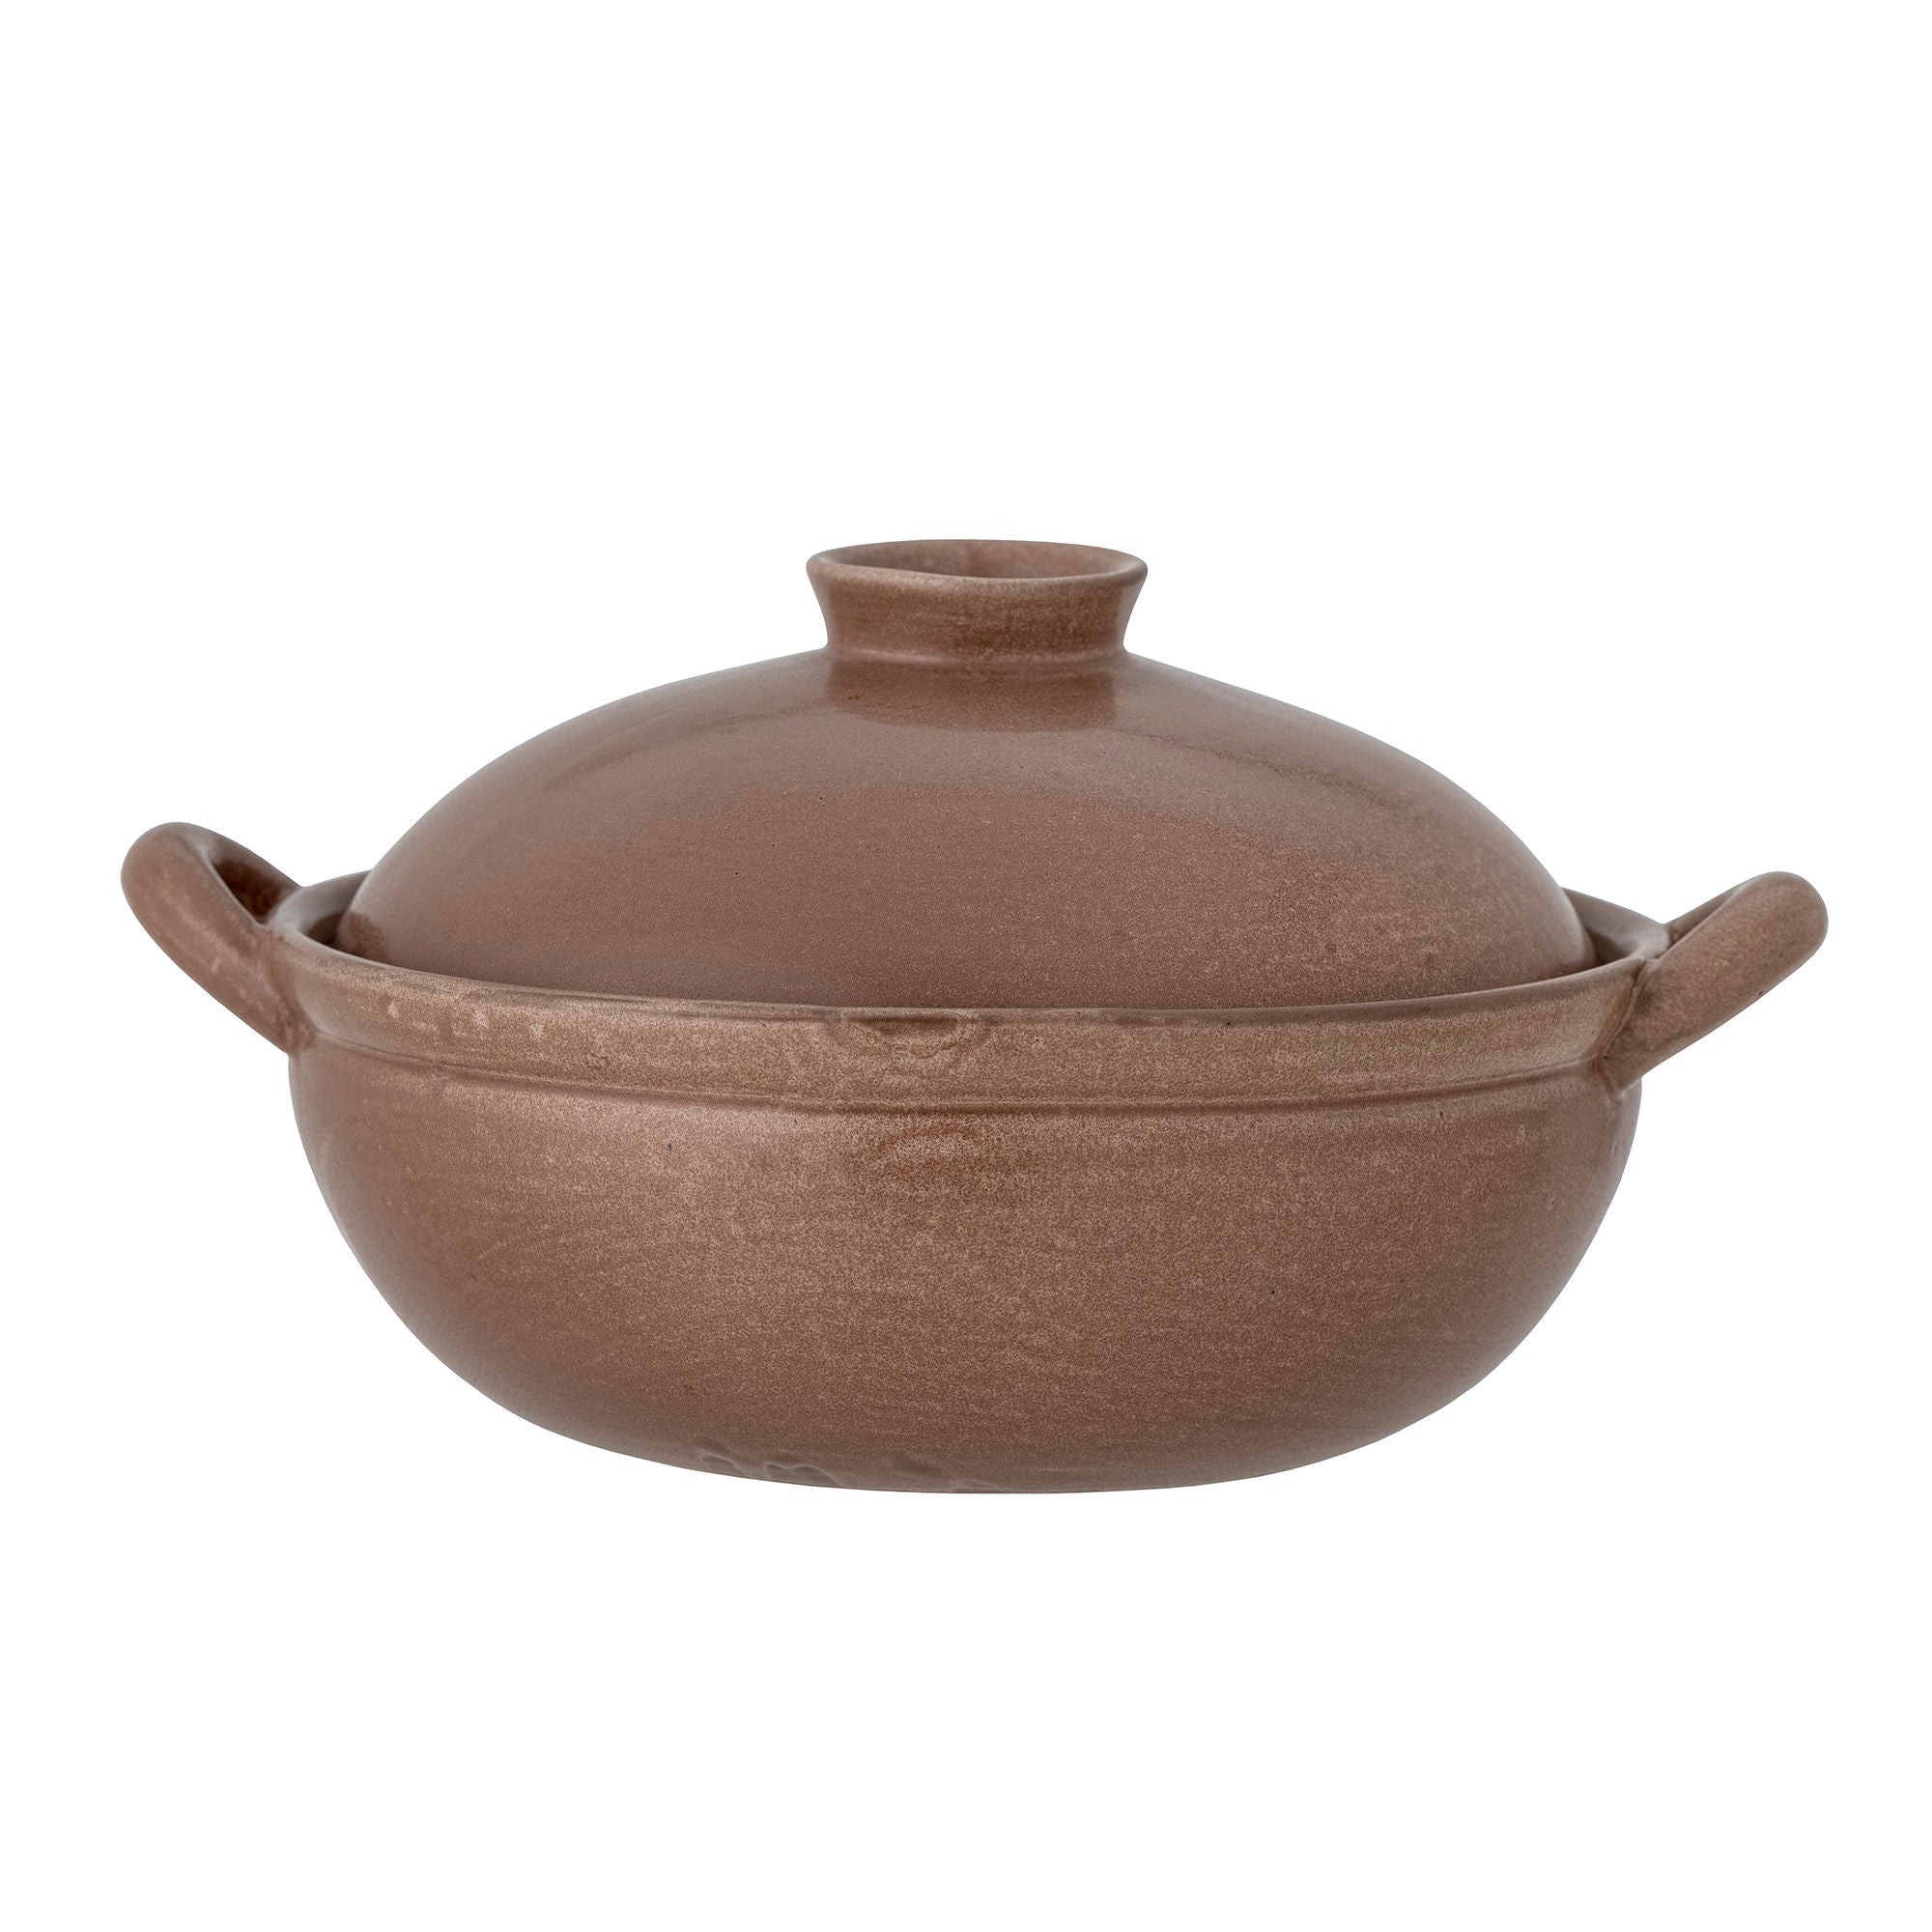 Creative Collection Jinnie Oven Dish w/Lid, Brown, Stoneware